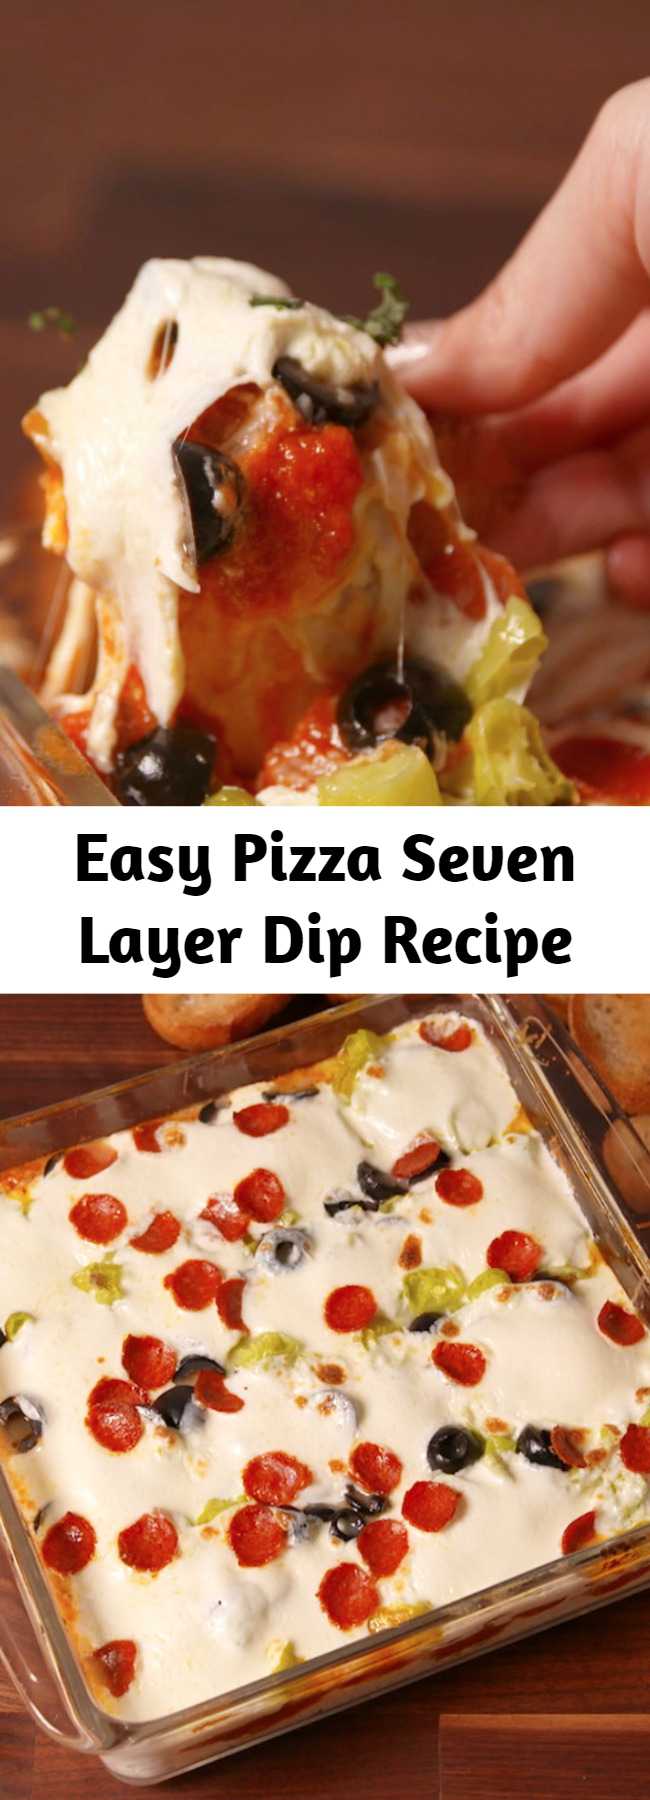 Easy Pizza Seven Layer Dip Recipe - This pizza seven-layer dip is the cheesiest party appetizer you'll ever have. #easyrecipes #dips #fingerfoods #pizzadip #partyapps #partyappetizers #superbowlrecipes